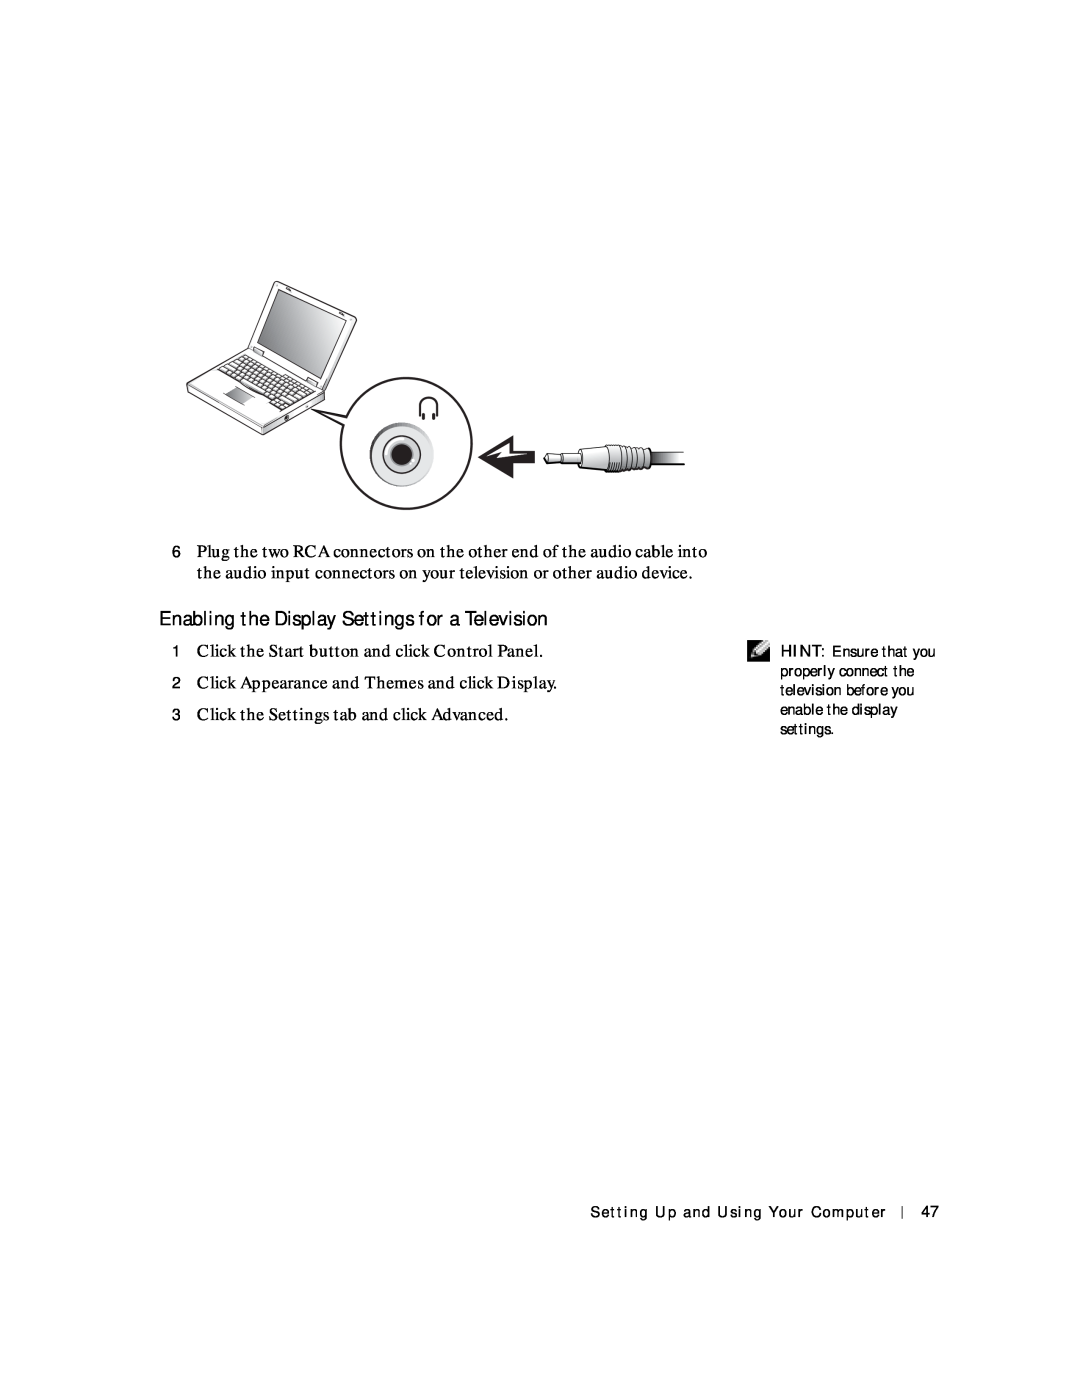 Dell 4150 owner manual Enabling the Display Settings for a Television, Click Appearance and Themes and click Display 